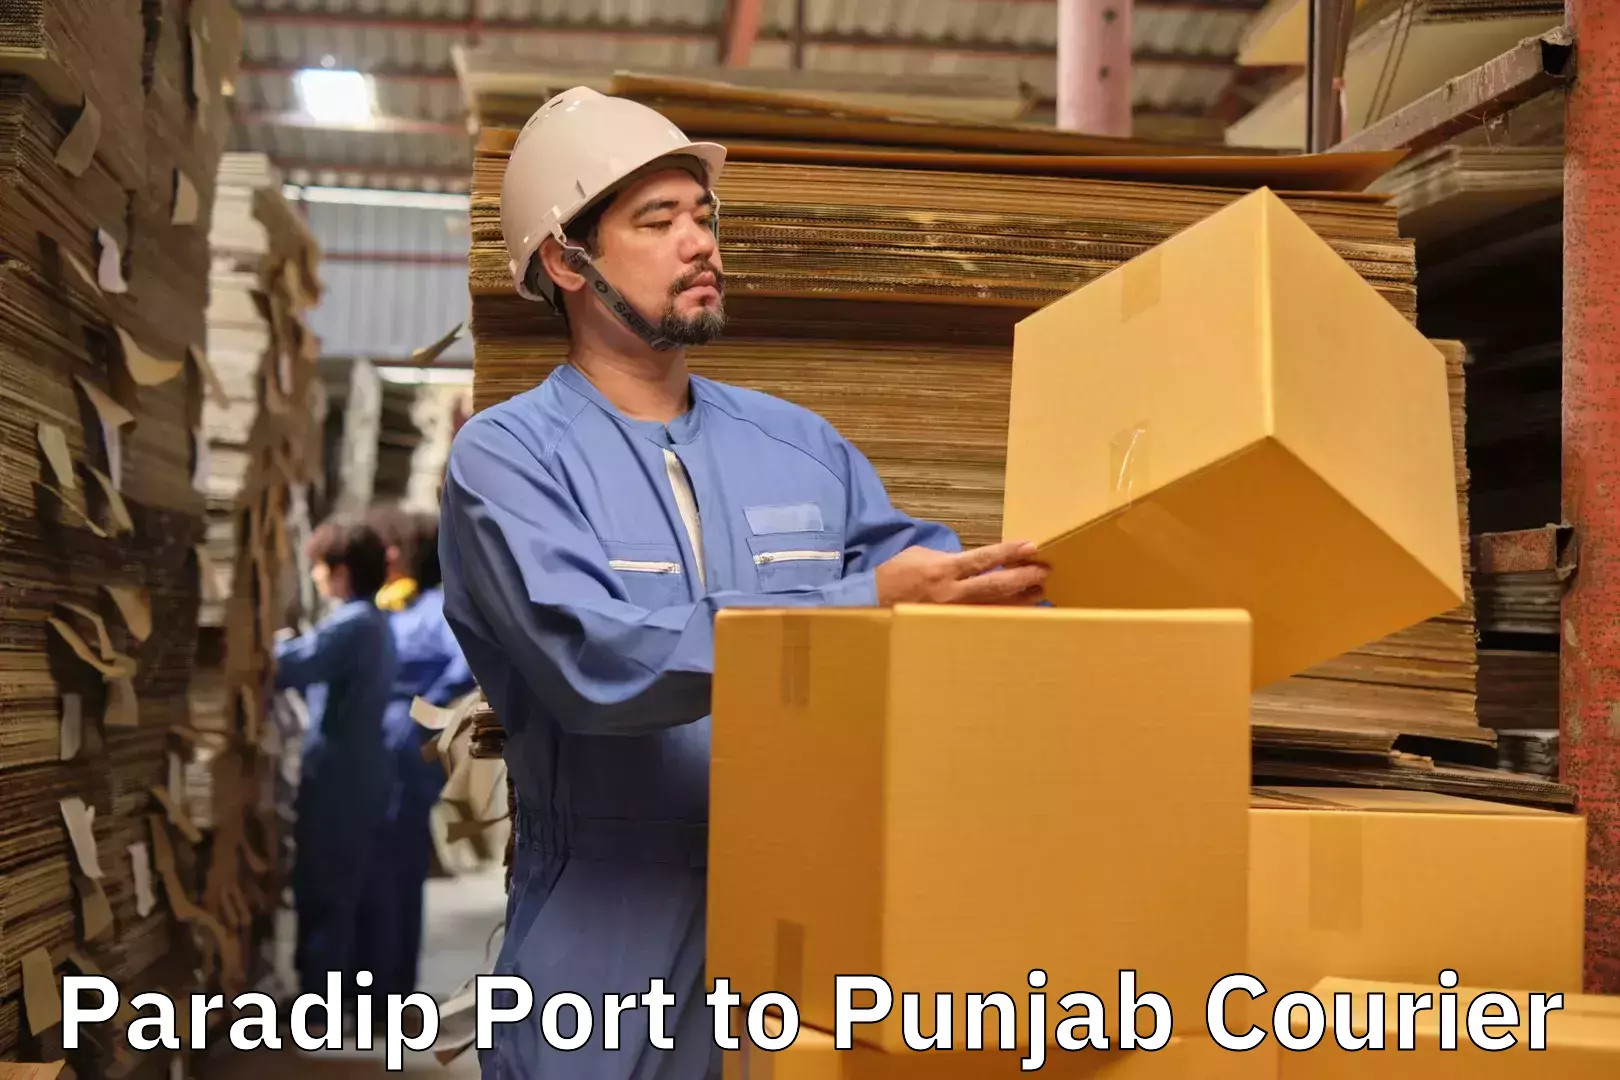 Luggage delivery app Paradip Port to Nabha